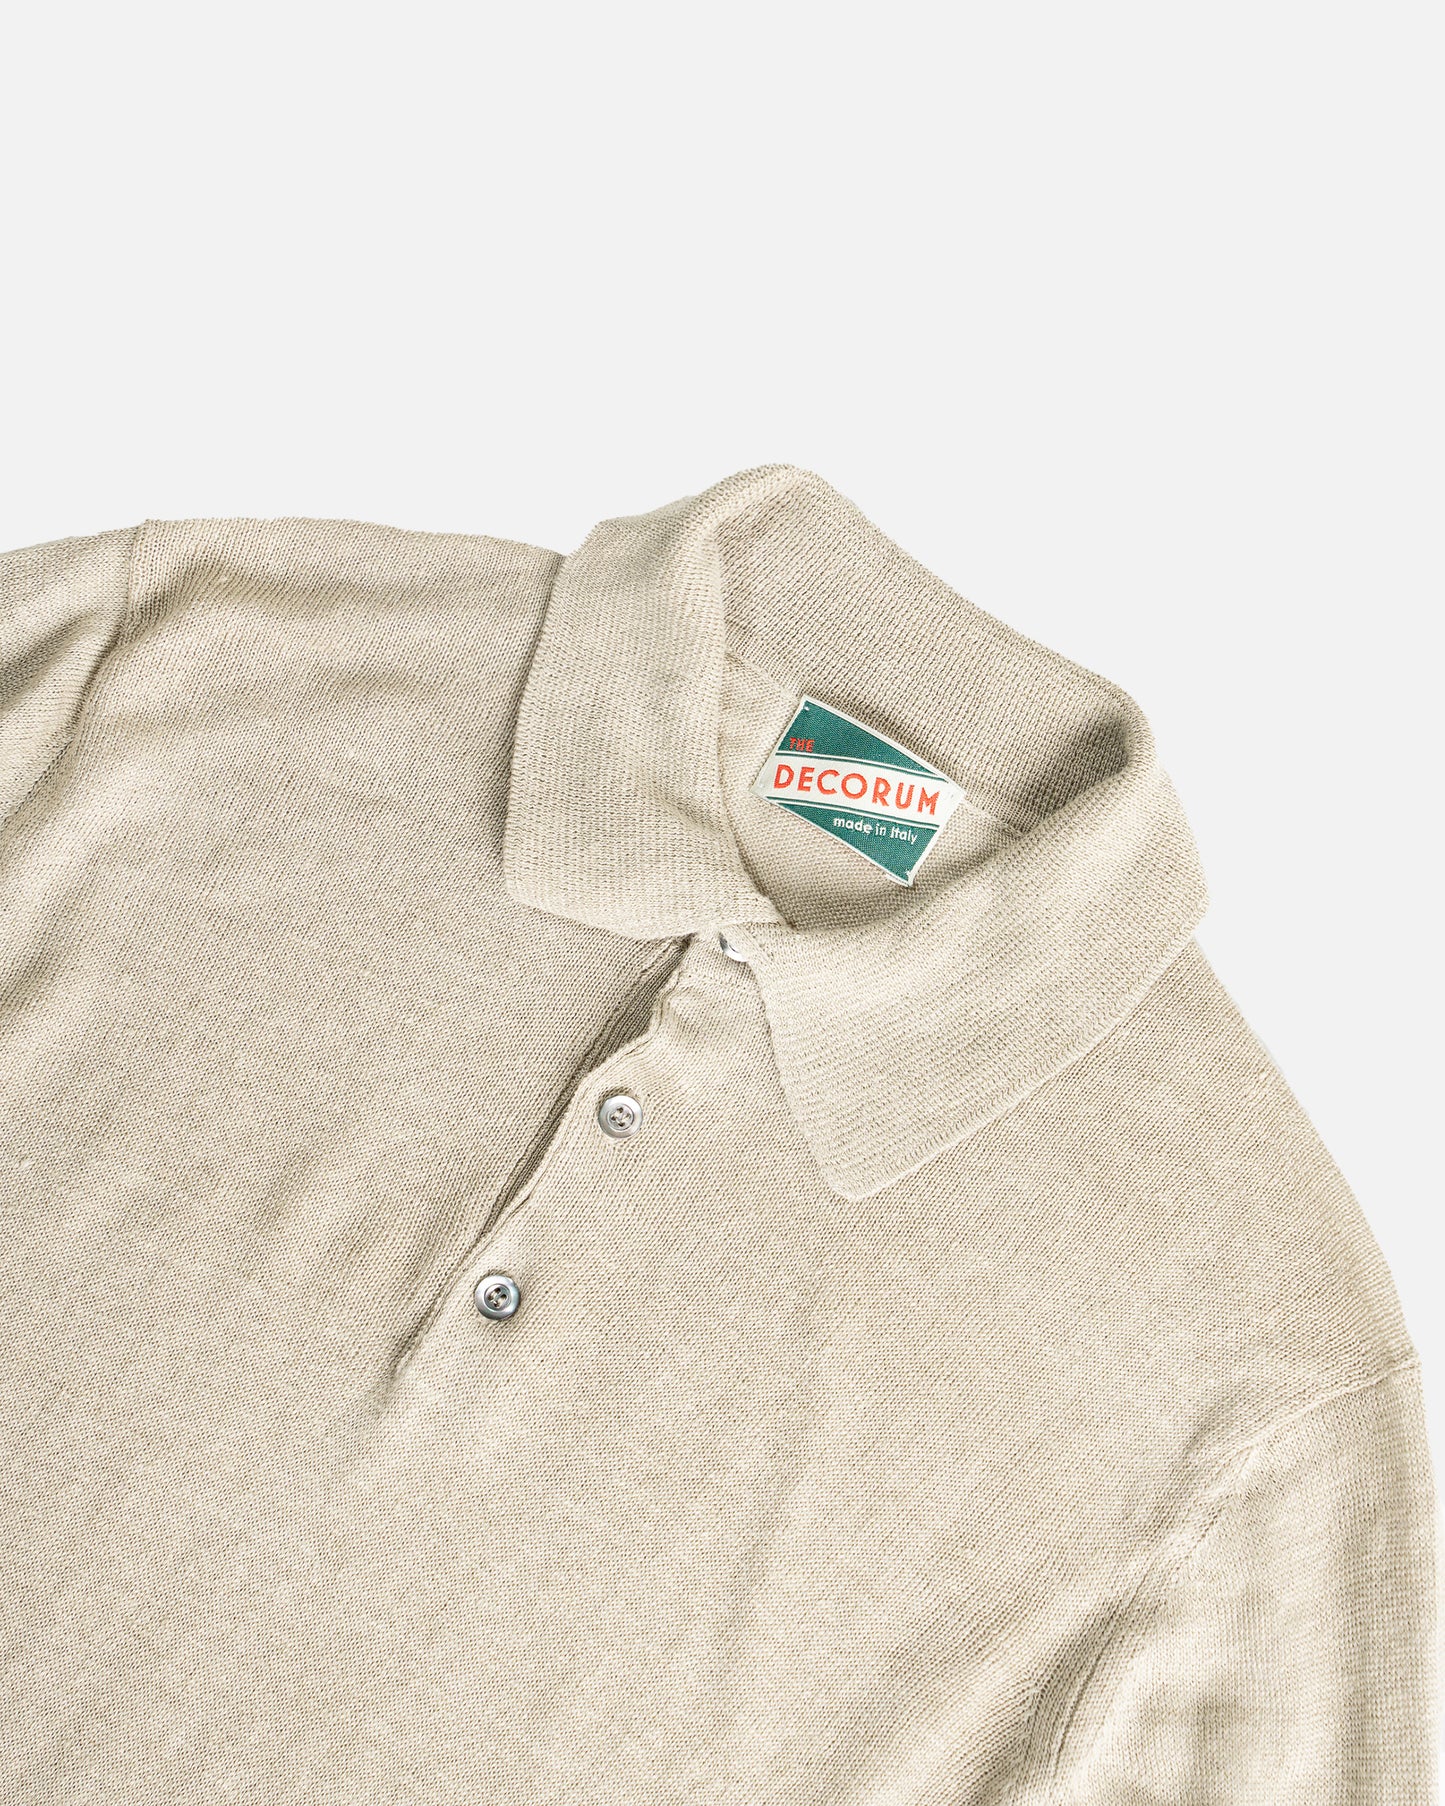 The Decorum Knitted Linen Polo Shirt in Perla